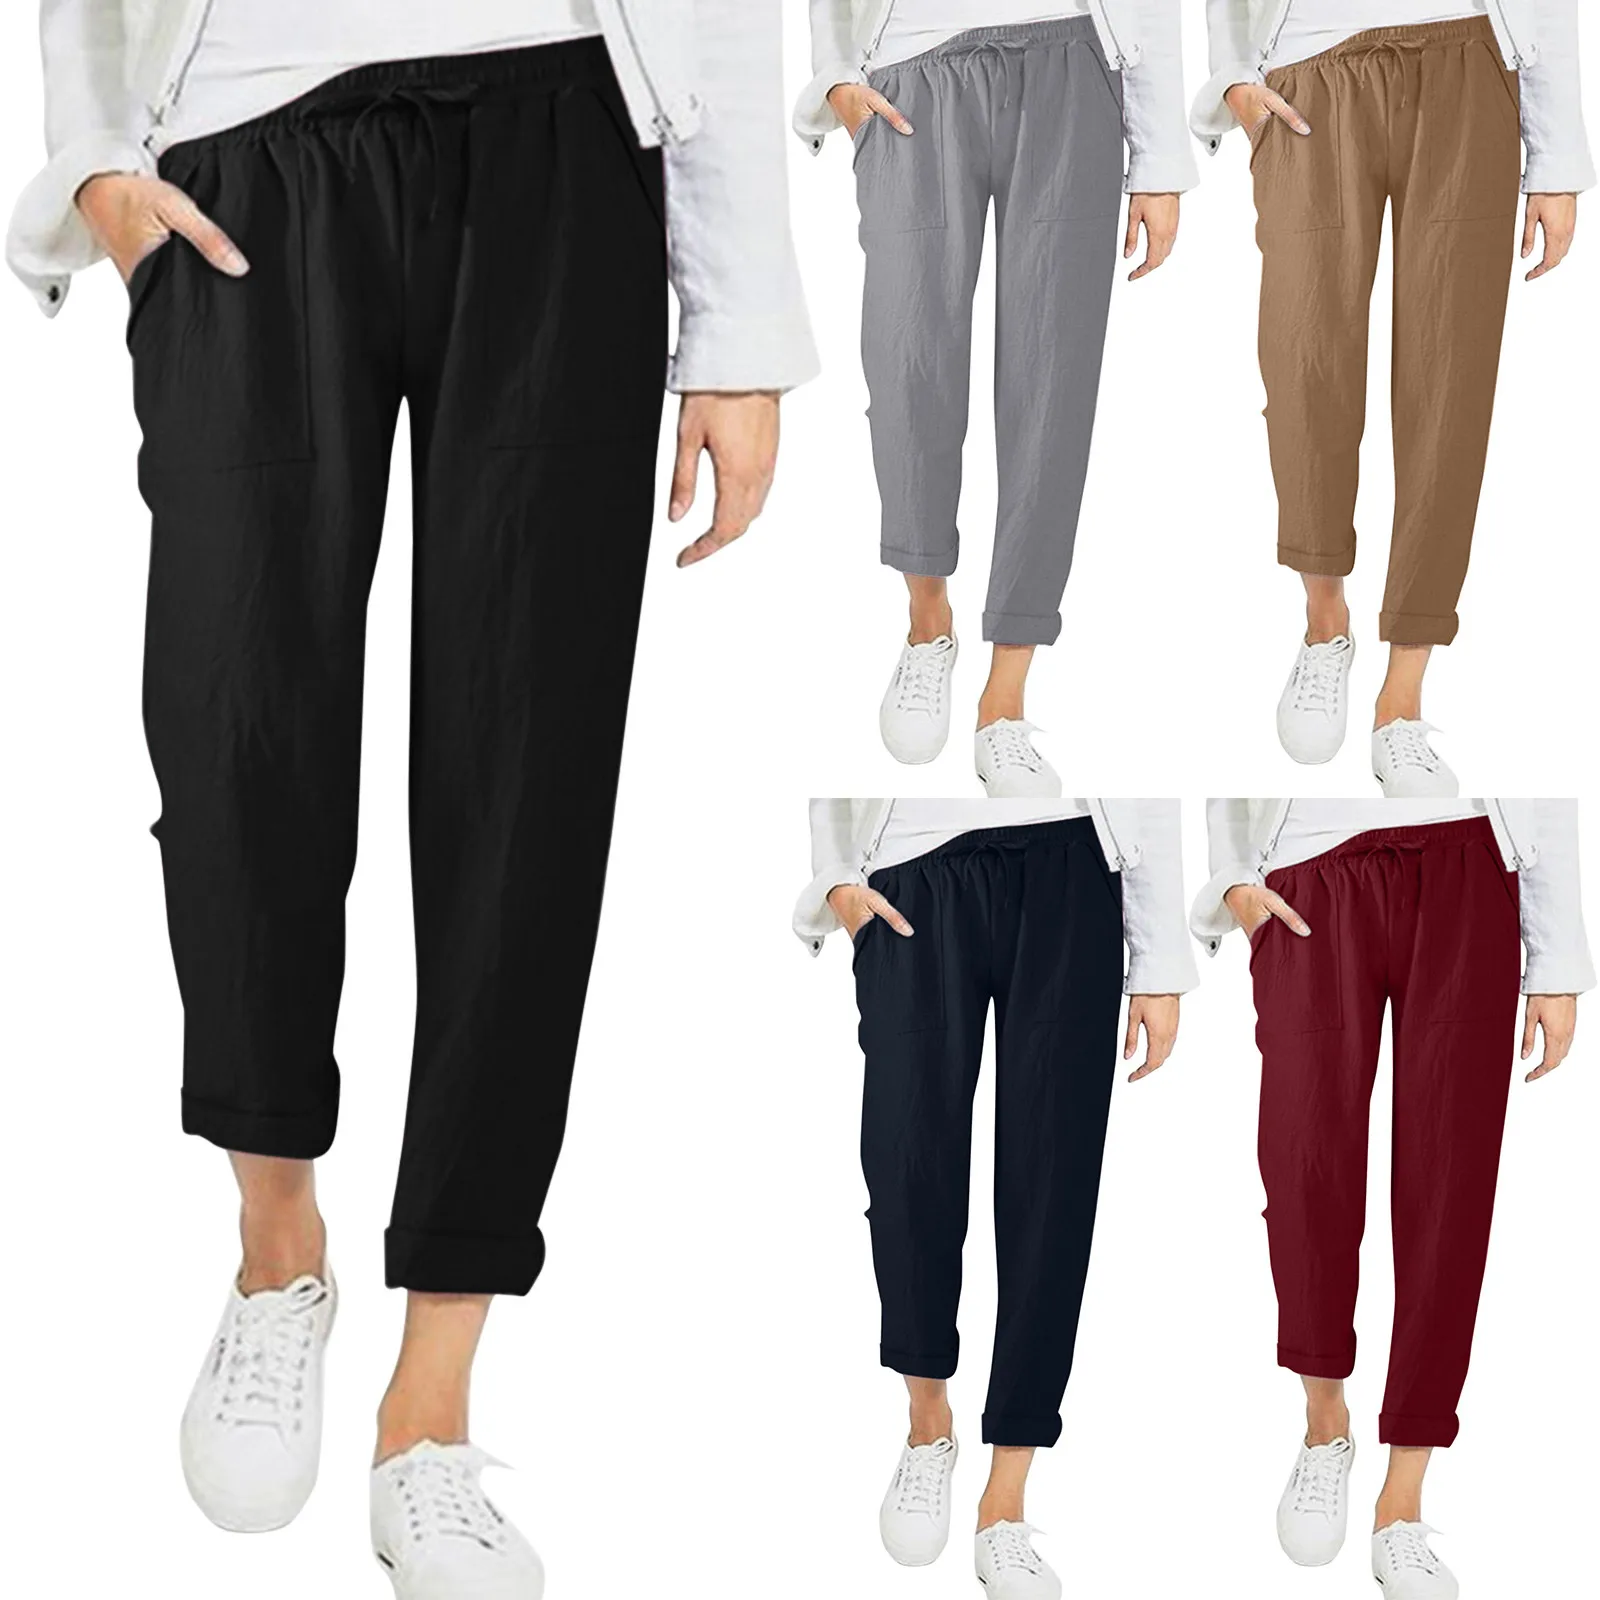 Cotton Linen Pants Women Casual Spring Summer High Waist Elastic Ankle-Length Pants Female Solid Pockets Harem Trousers 2024 famous brand jeans vintage hole star embroidery ankle length denim jeans female casual loose harem pant trousers cloth